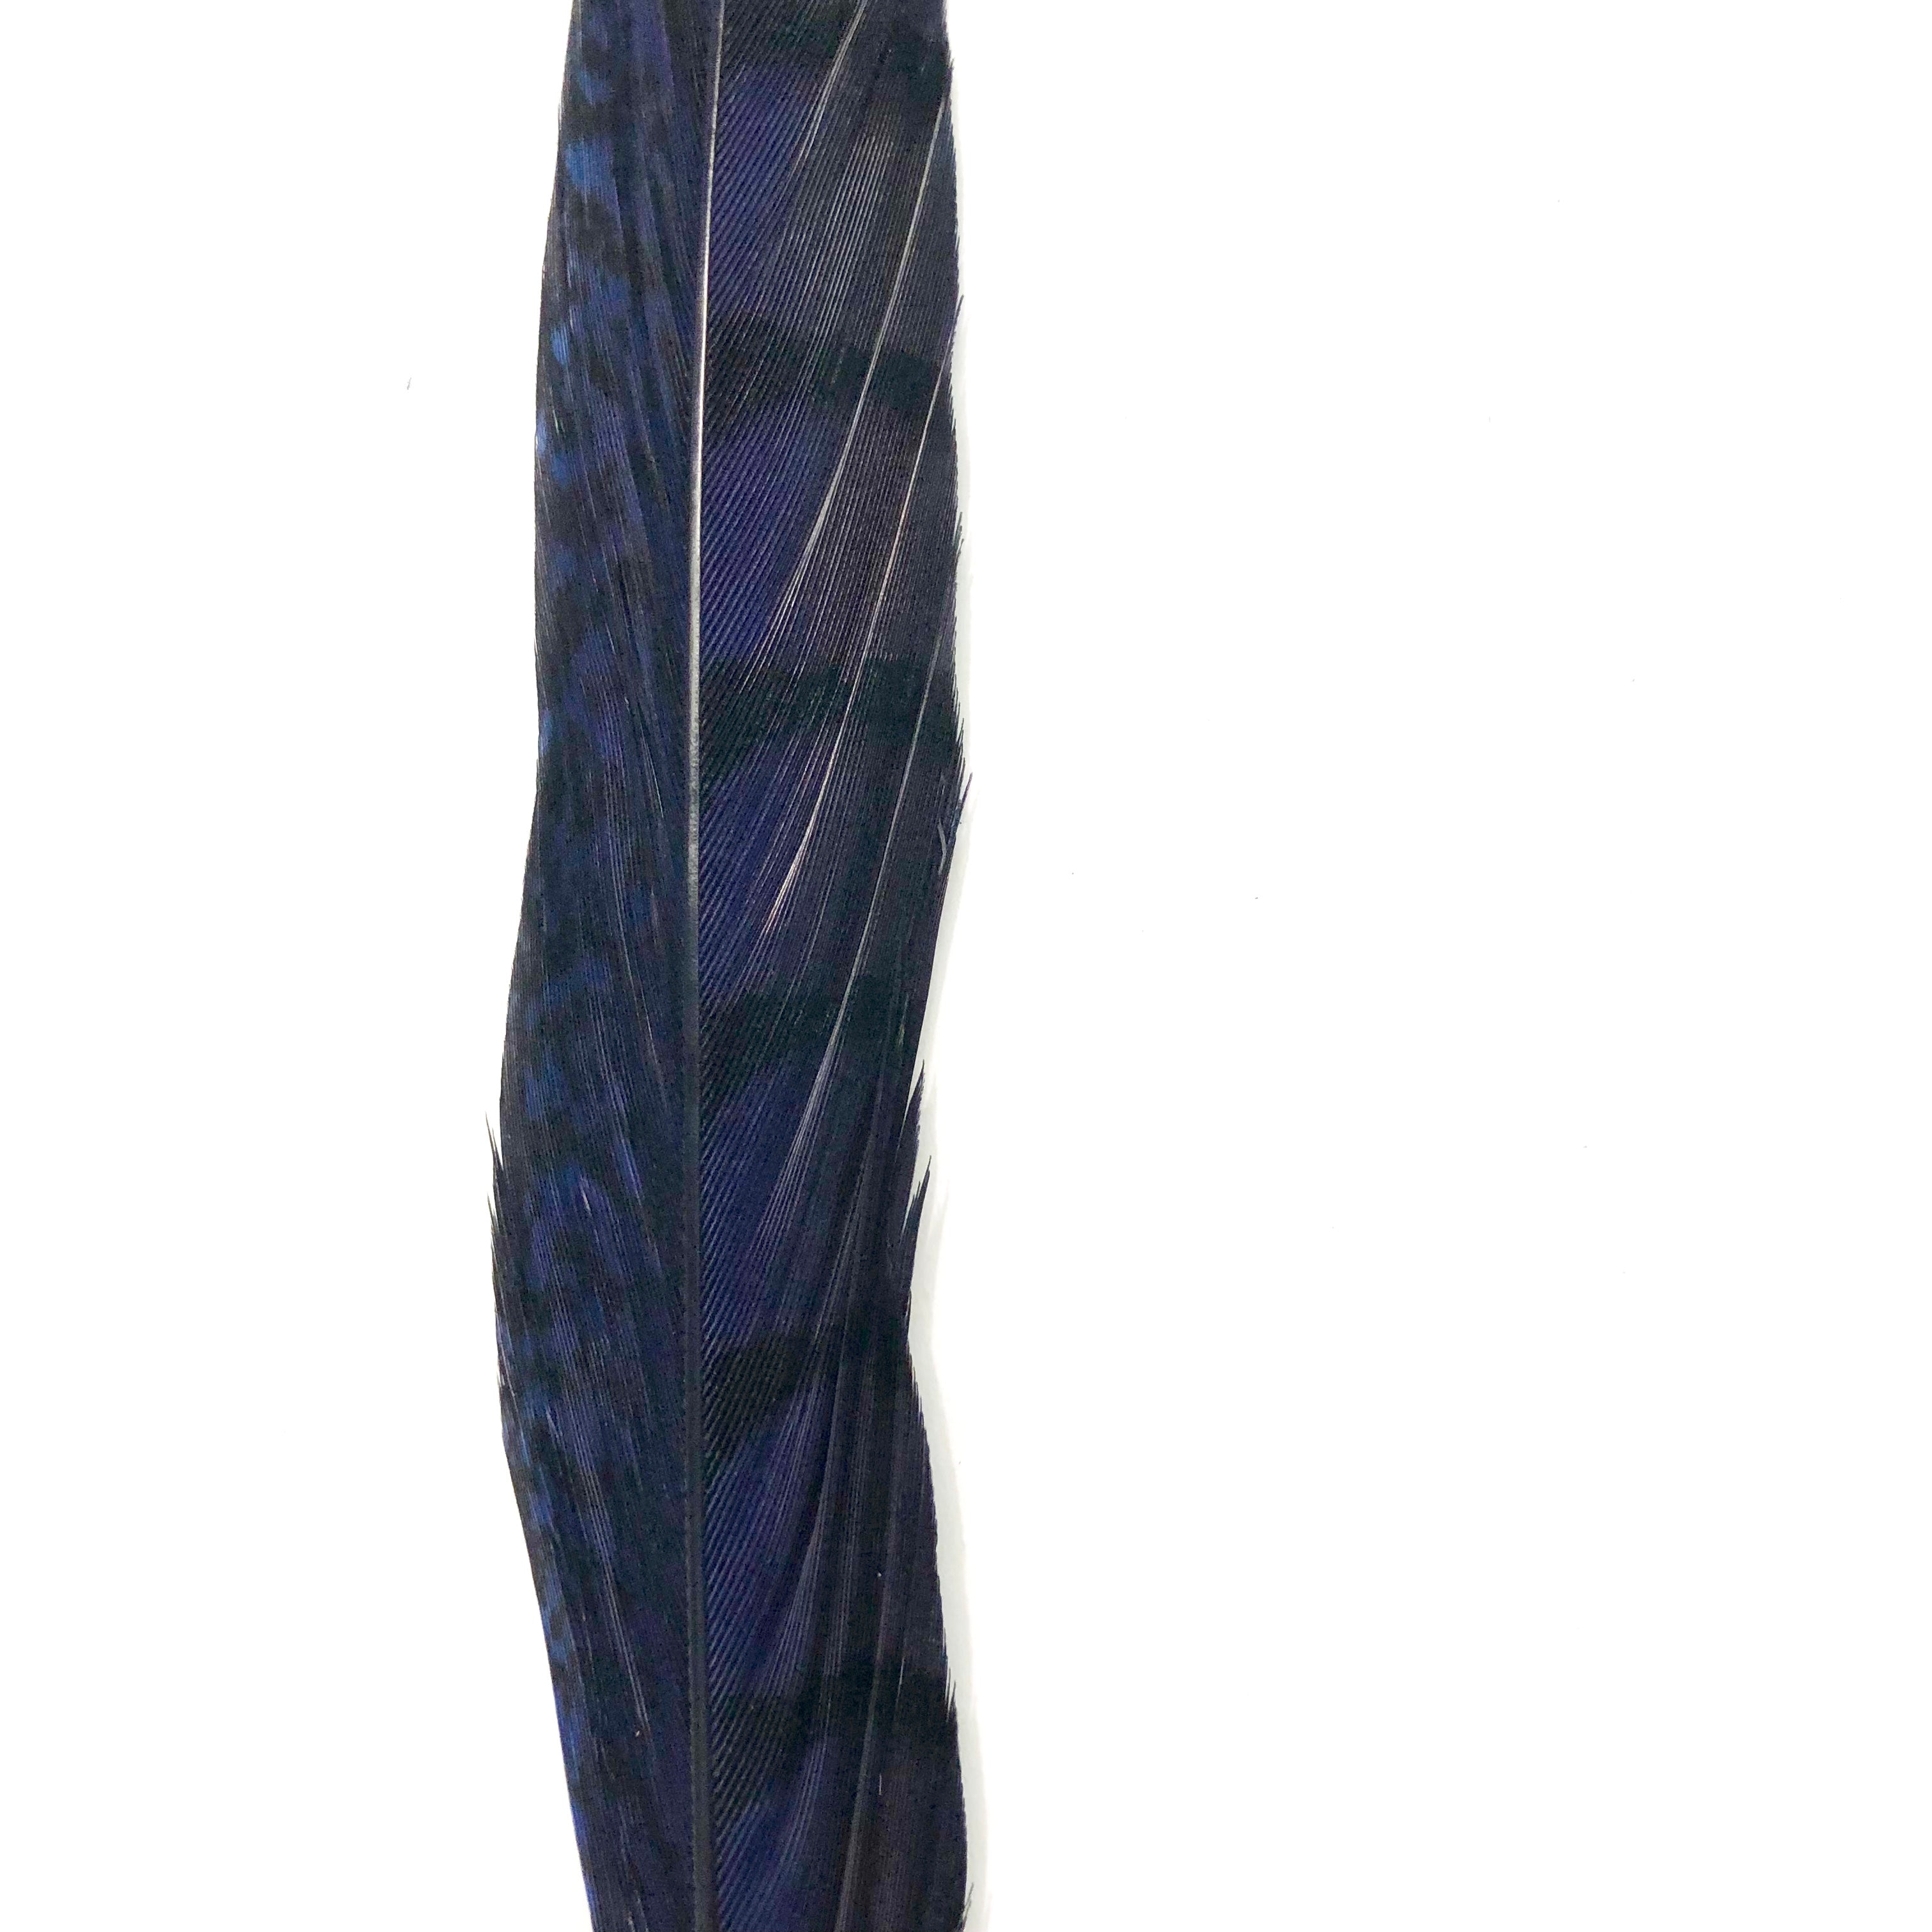 10" to 20" Lady Amherst Pheasant Side Tail Feather - Navy Blue ((SECONDS))